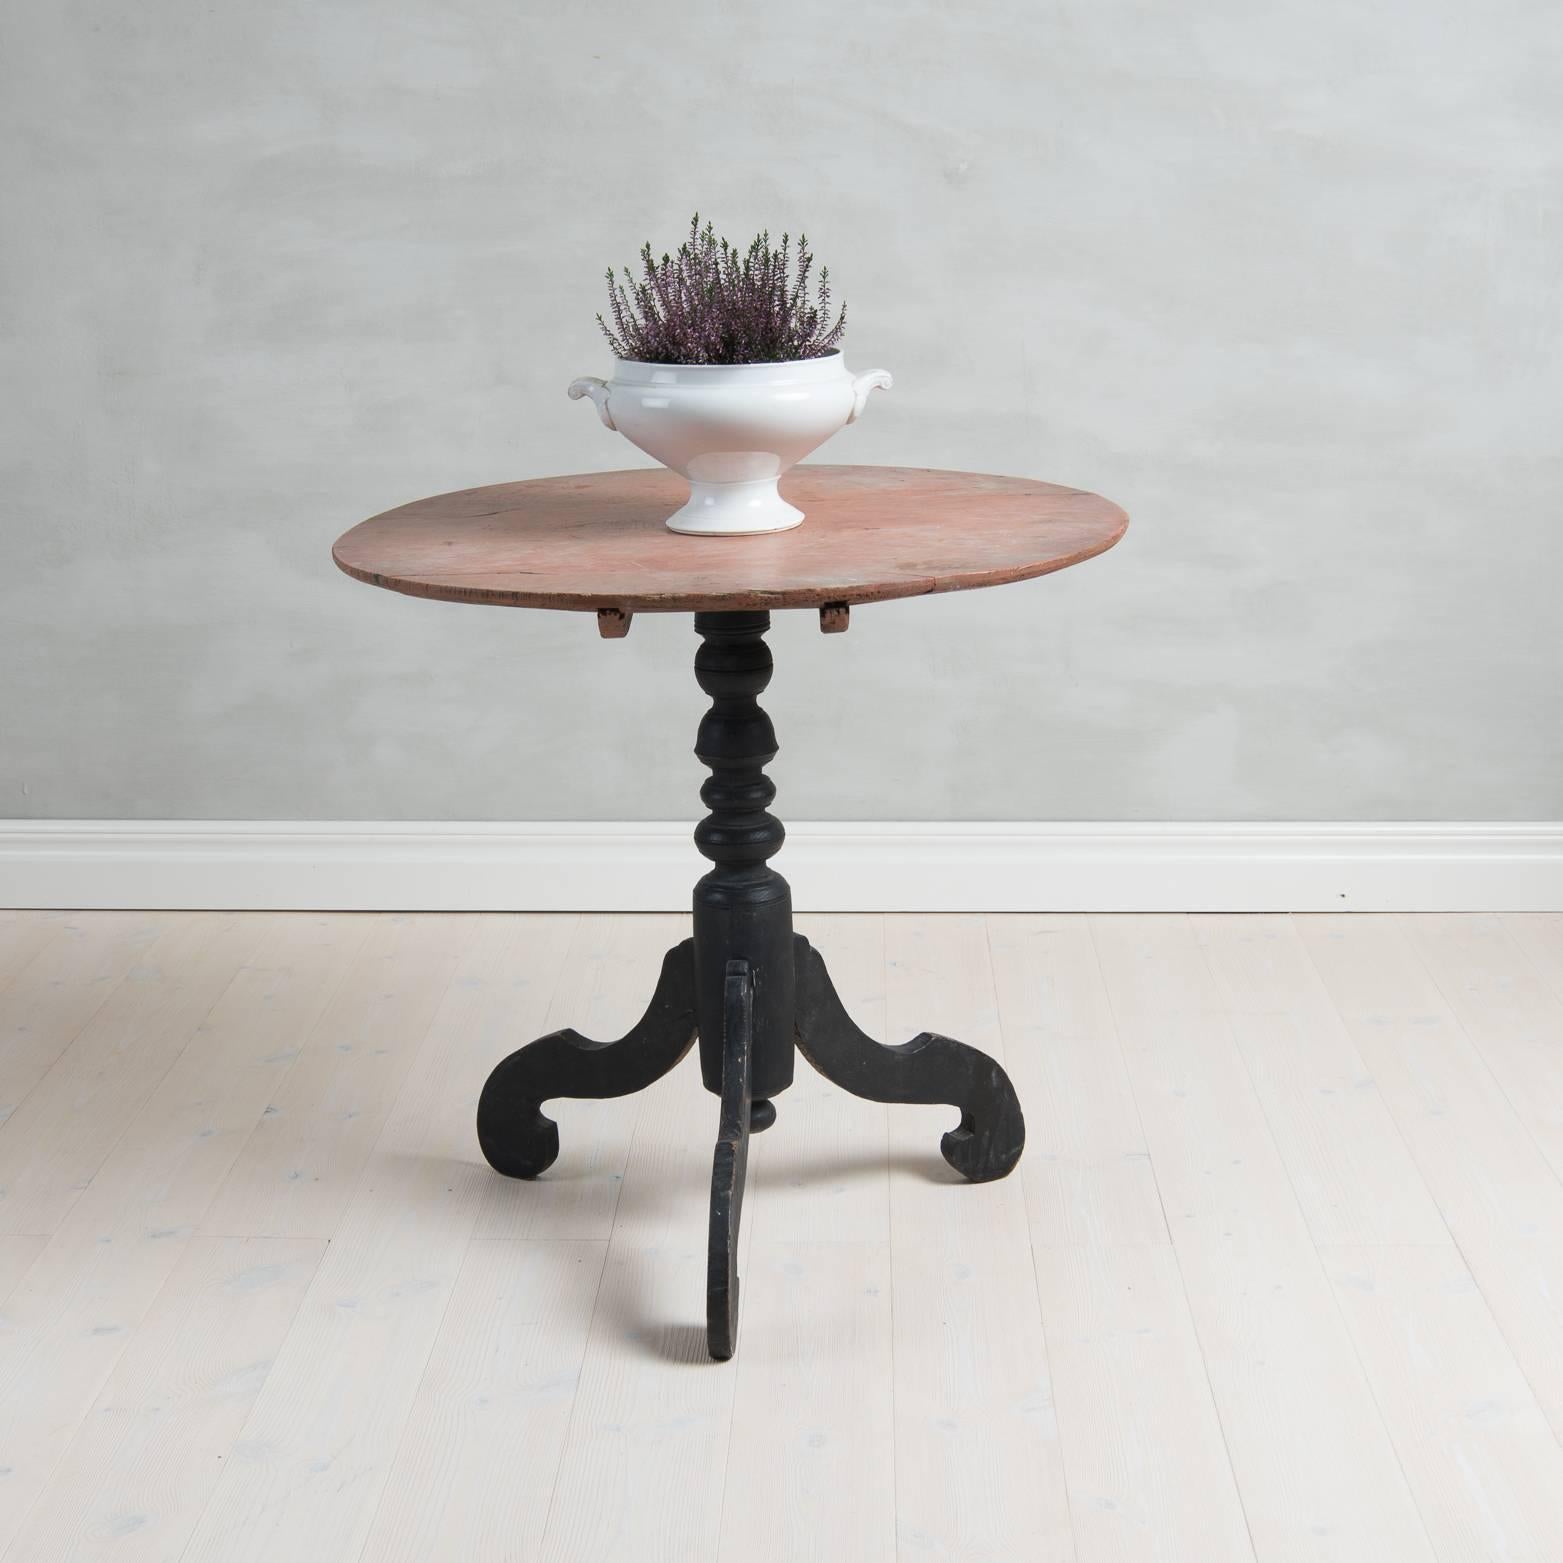 Tilt-top table with round tabletop with three turned legs on a curved foot. The table has original paint and is from Northern Sweden.